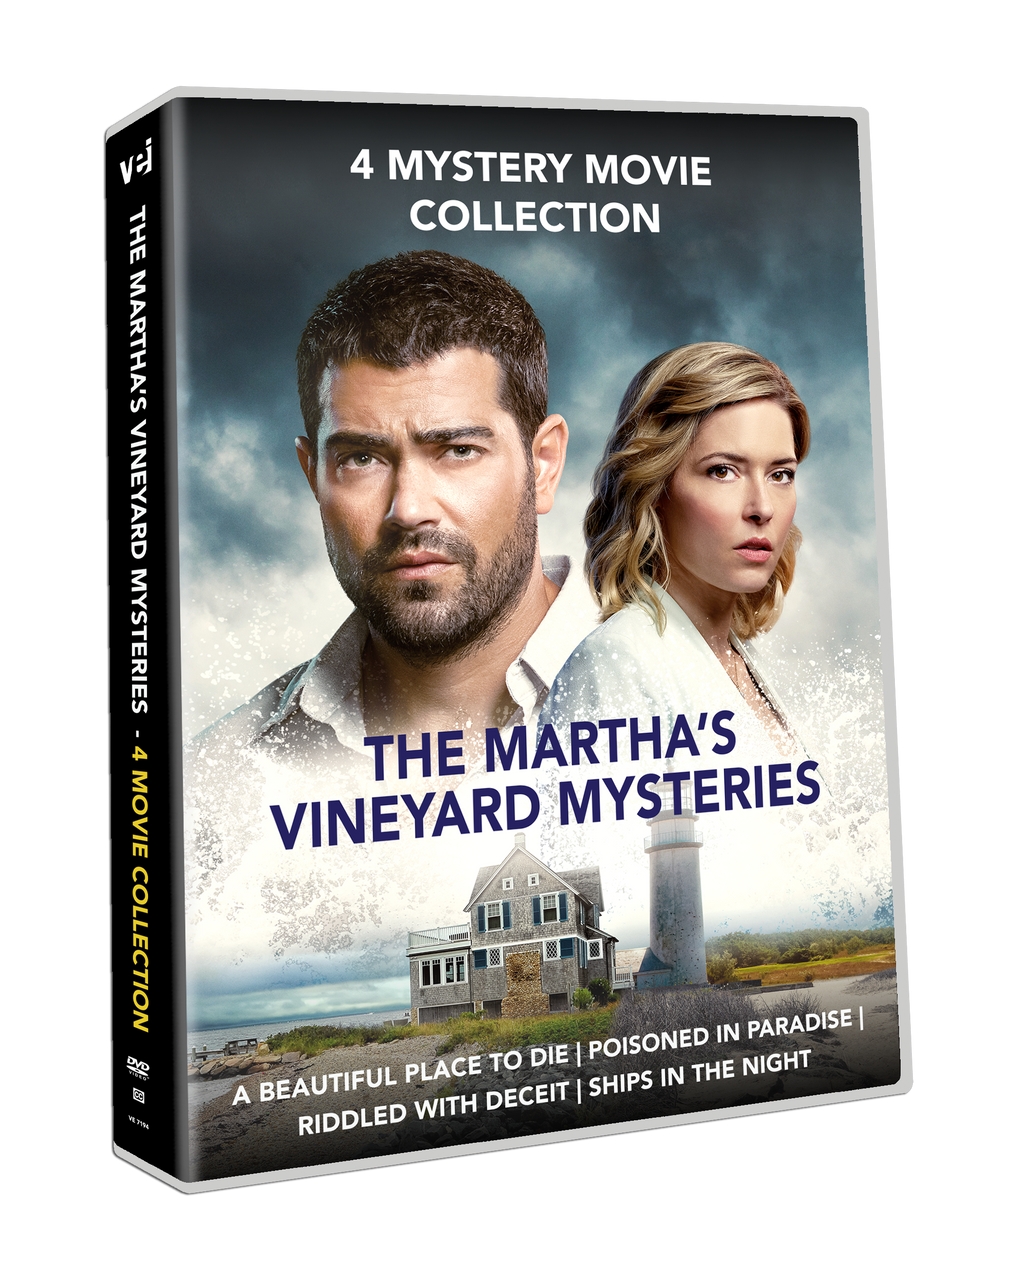 The Martha’s Vineyard Mysteries - 4 Movie Collection [DVD]  #7194